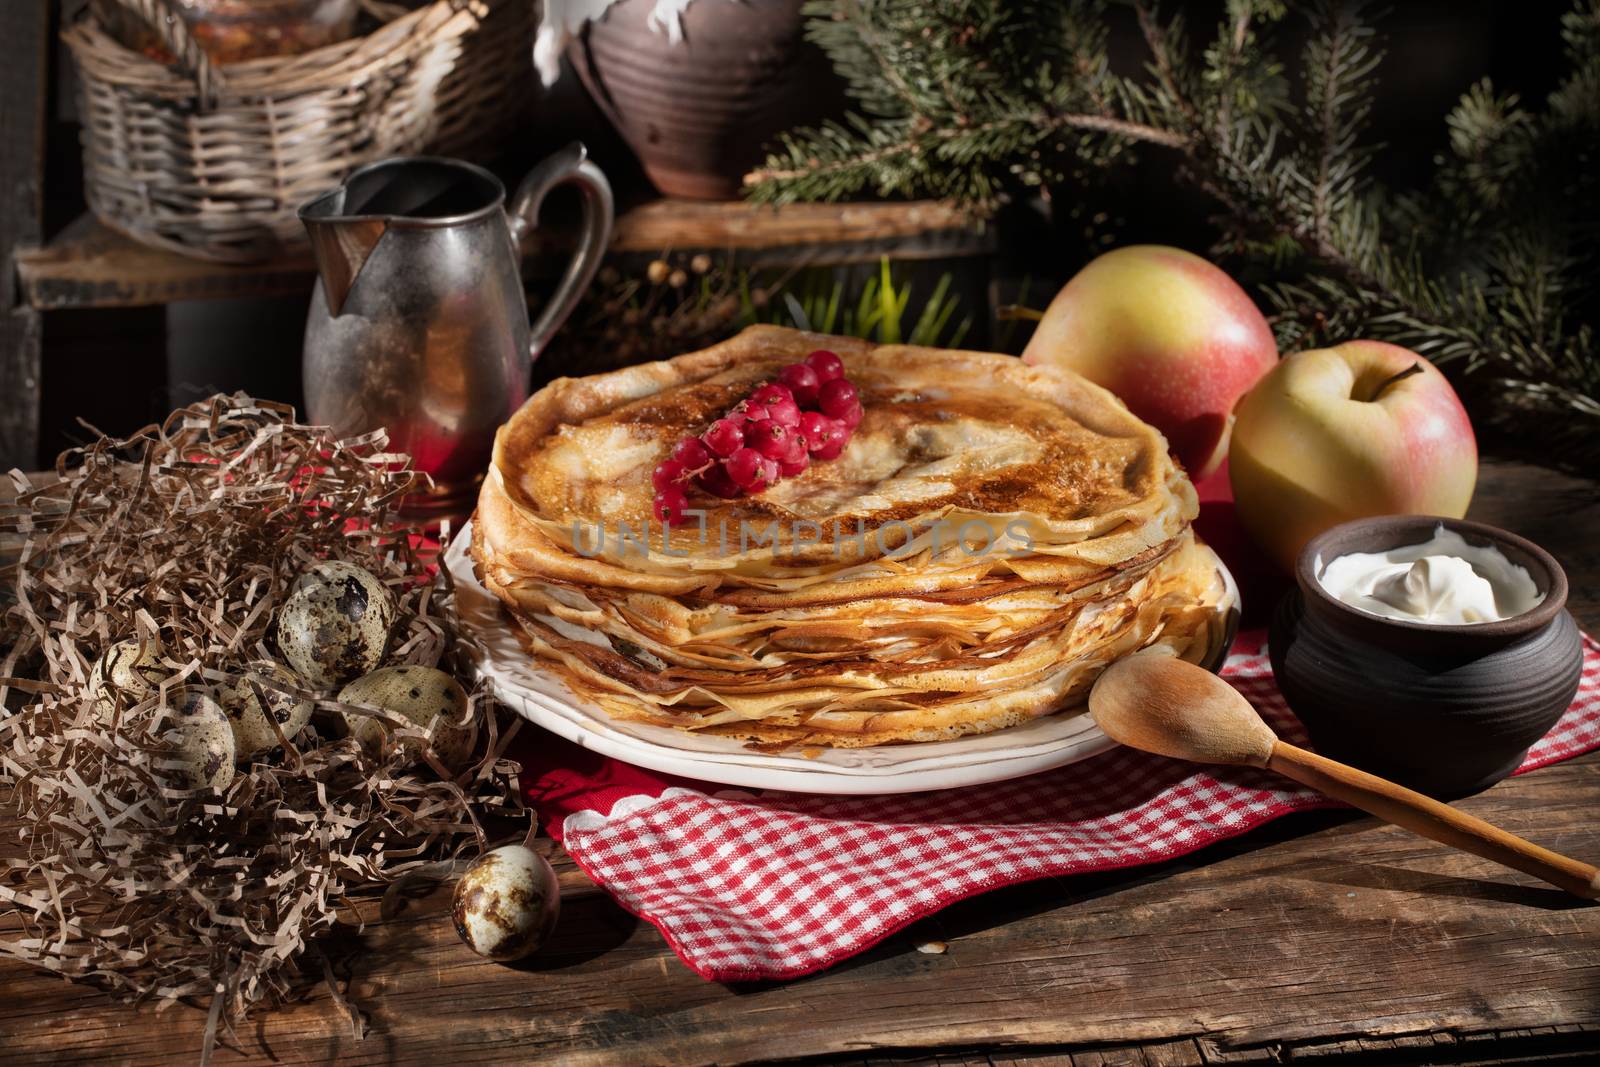 Plate with pancakes on an old wooden background